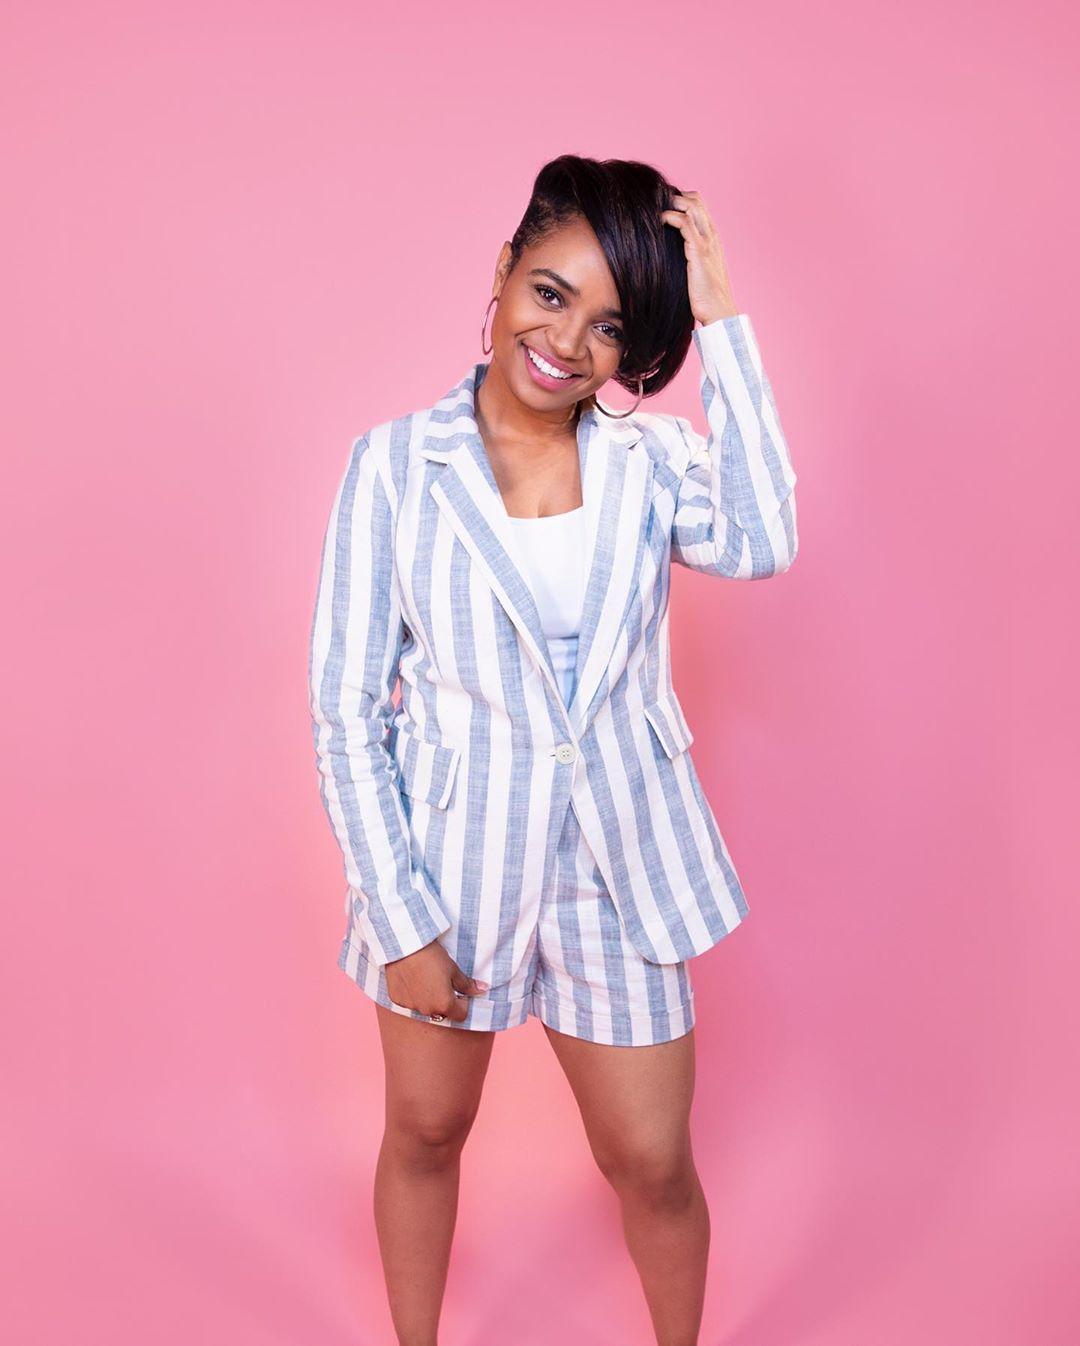 51 Hot Pictures Of Kyla Pratt Which Will Make You Swelter All Over 47